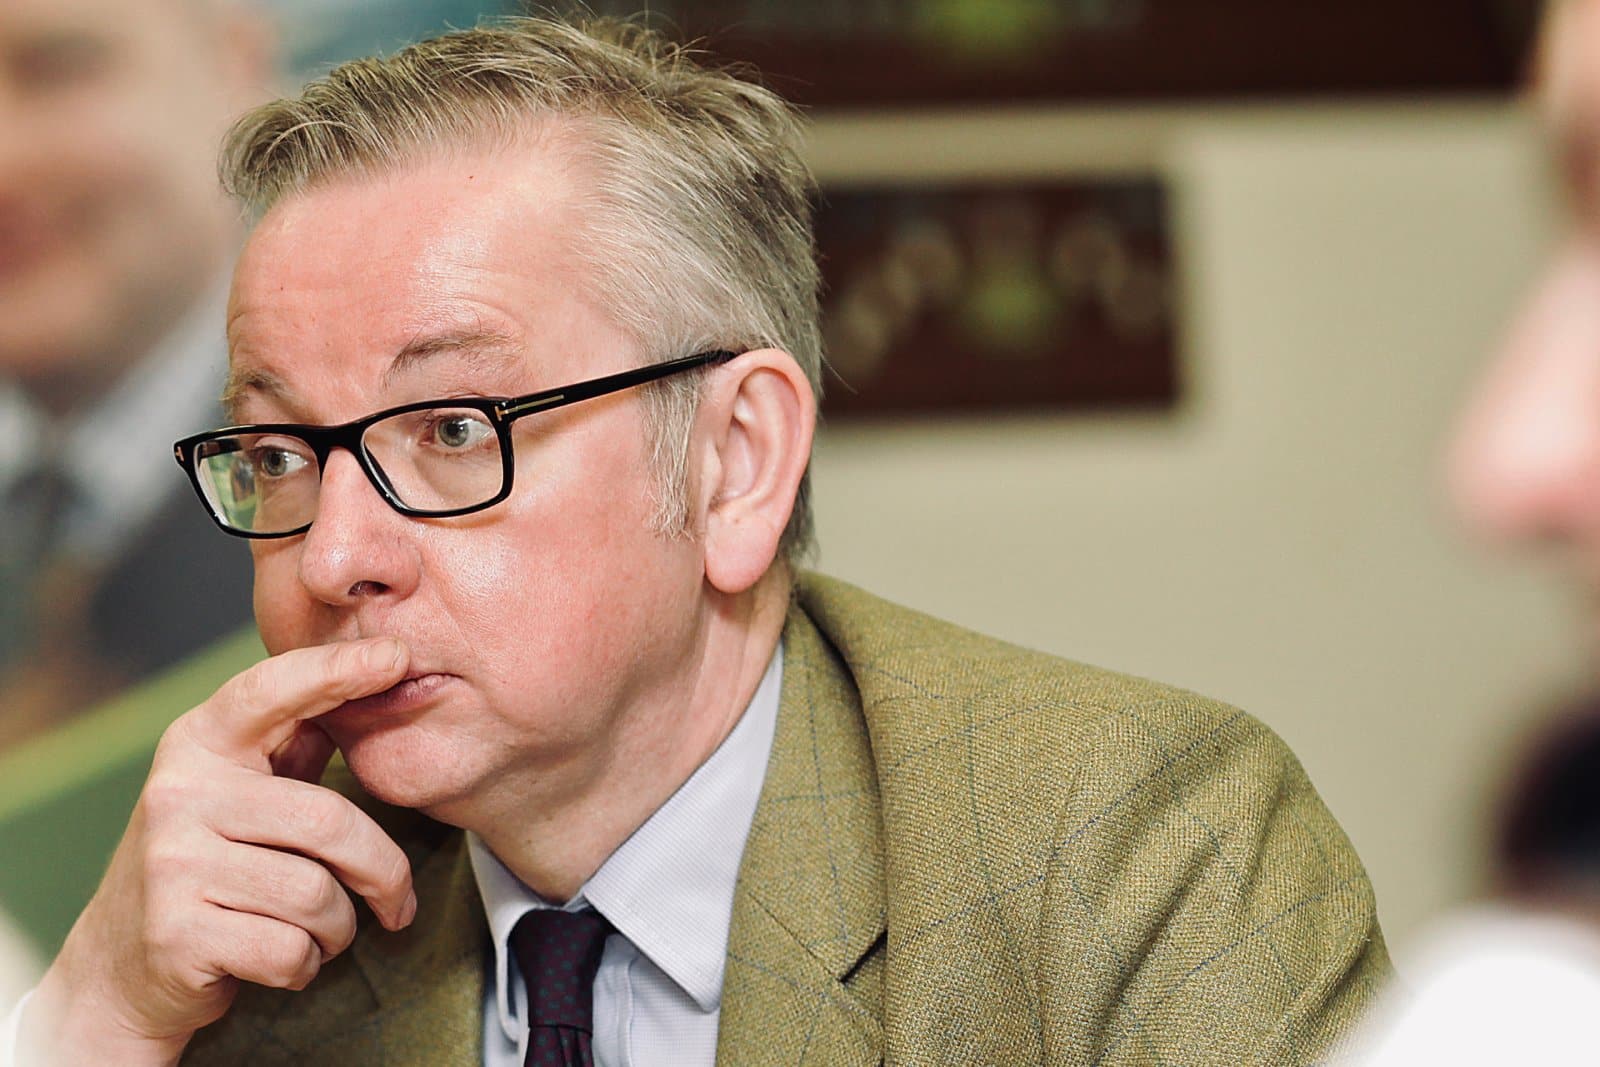 Image Credit: Shutterstock / Peter Rhys Williams <p><span>The move, spearheaded by Michael Gove, the Communities Secretary, has drawn criticism from veteran activists across the entire political spectrum.</span></p>